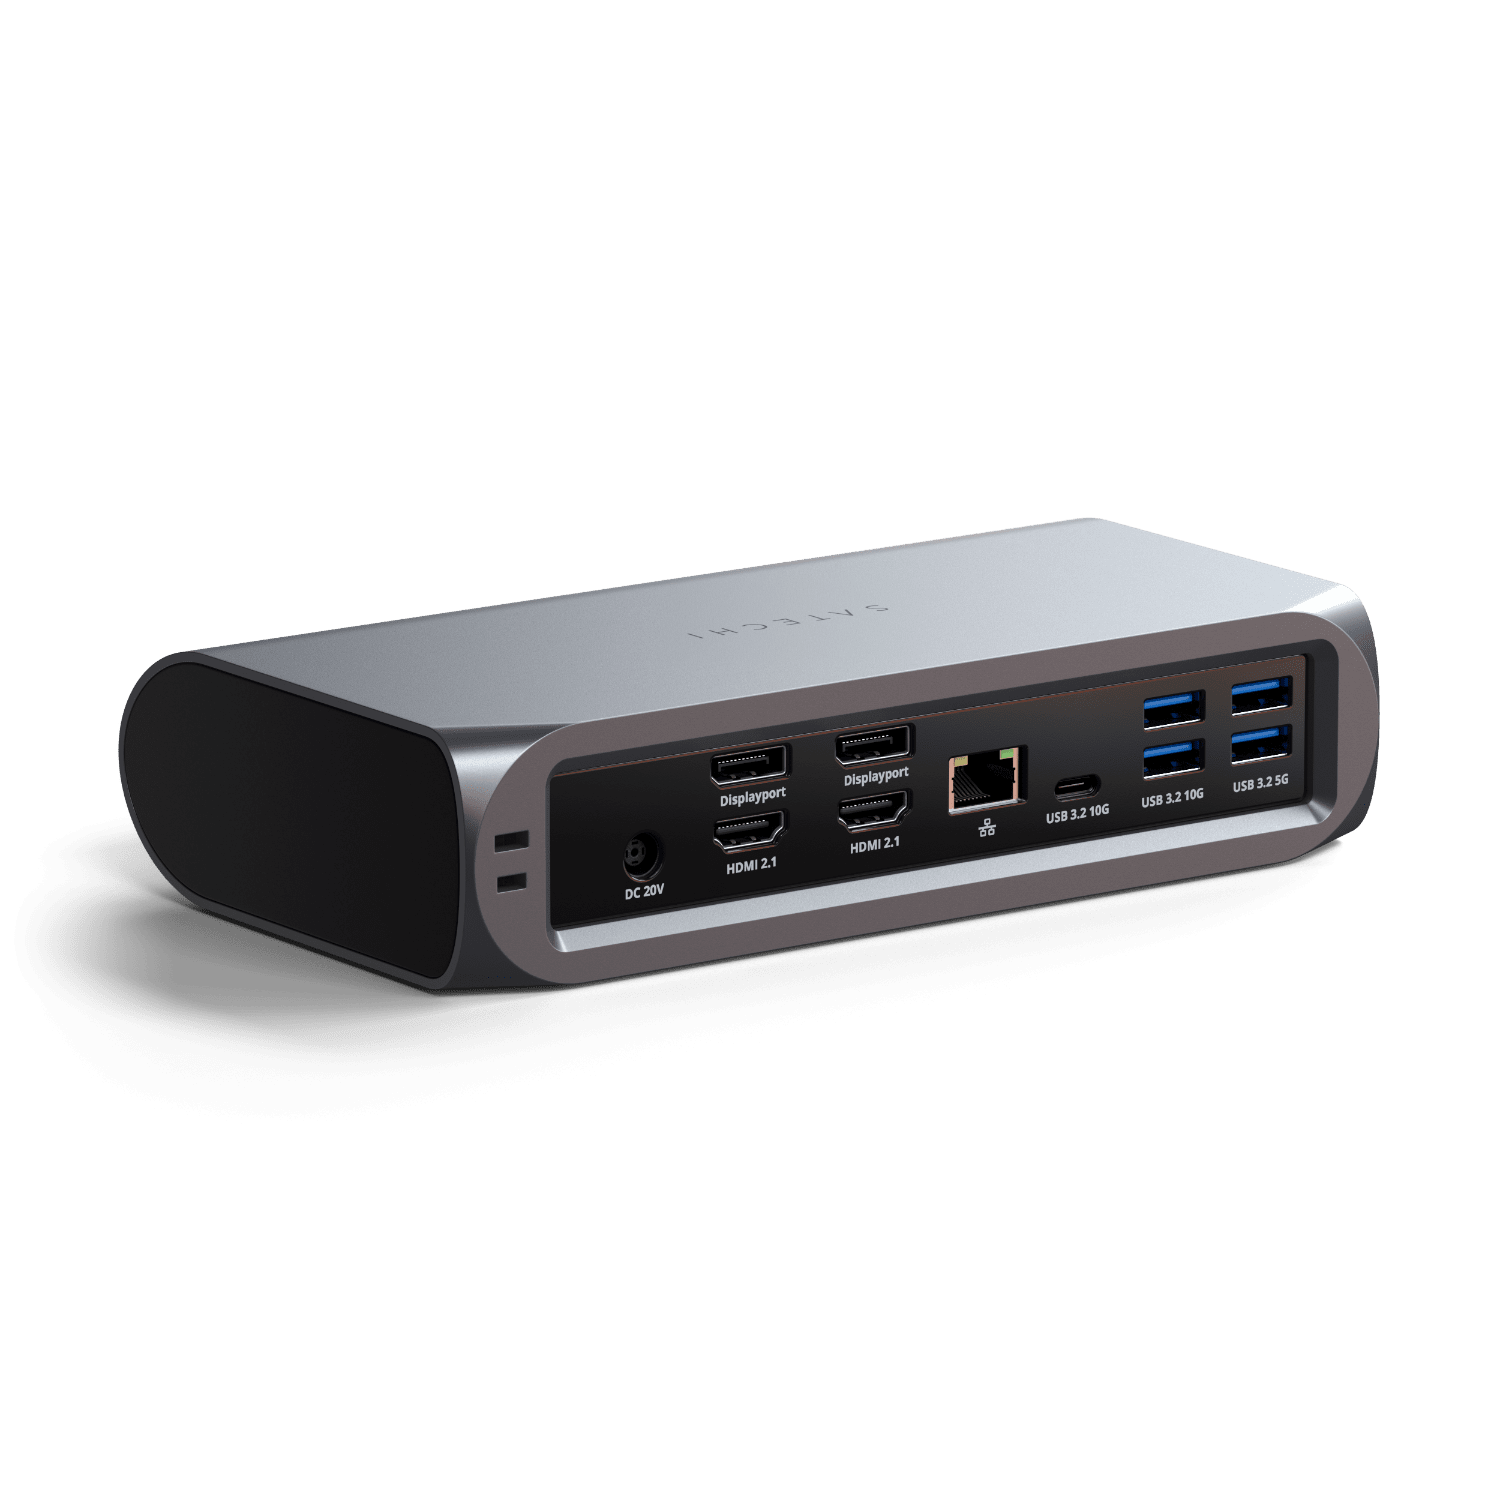 Satechi launches new 16-in-1 Thunderbolt 4 Multimedia Pro dock for